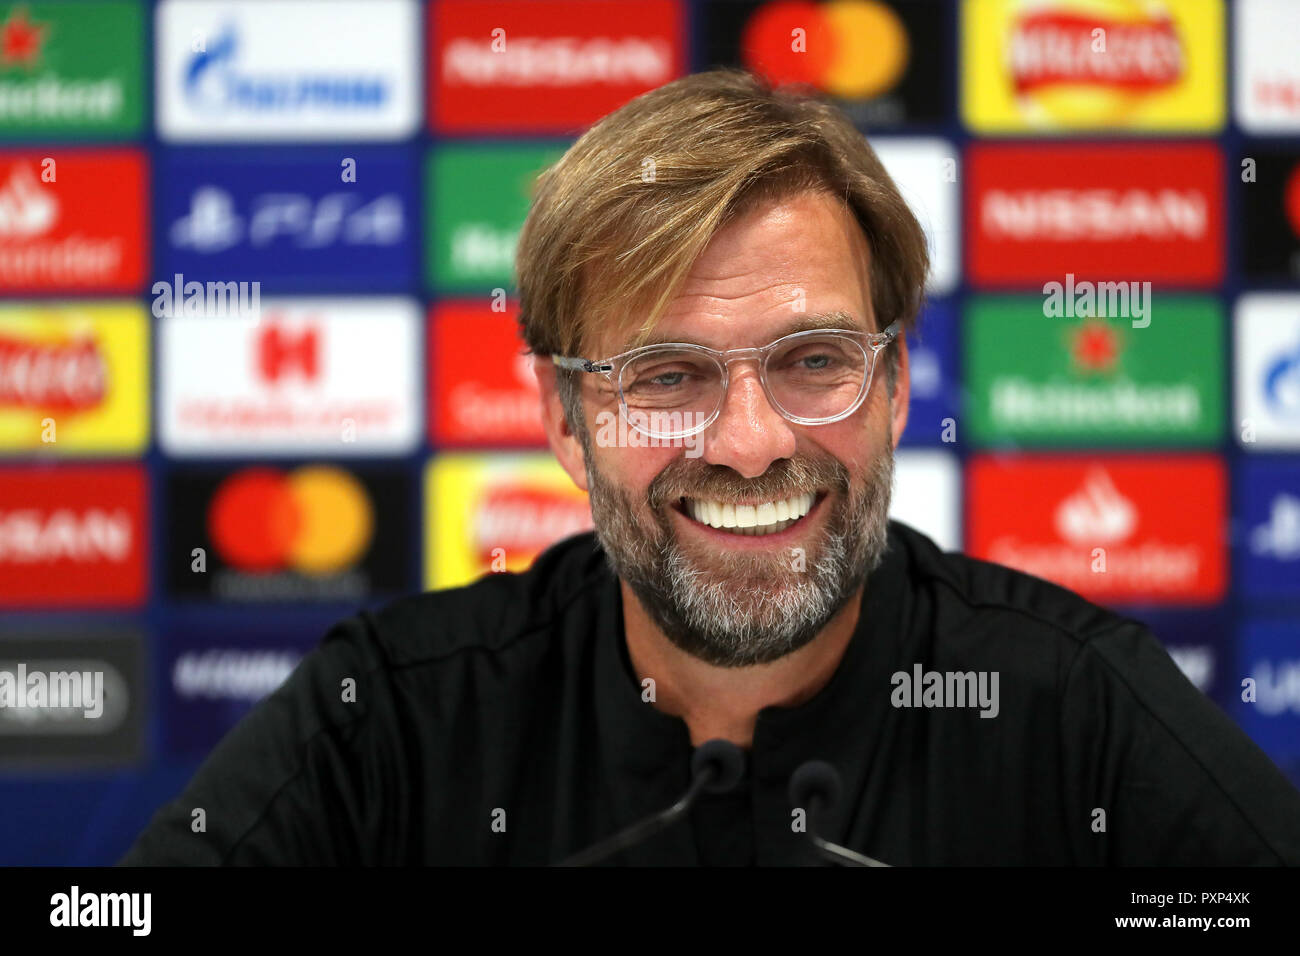 Liverpool manager Jurgen Klopp during the press conference at Anfield, Liverpool. Stock Photo